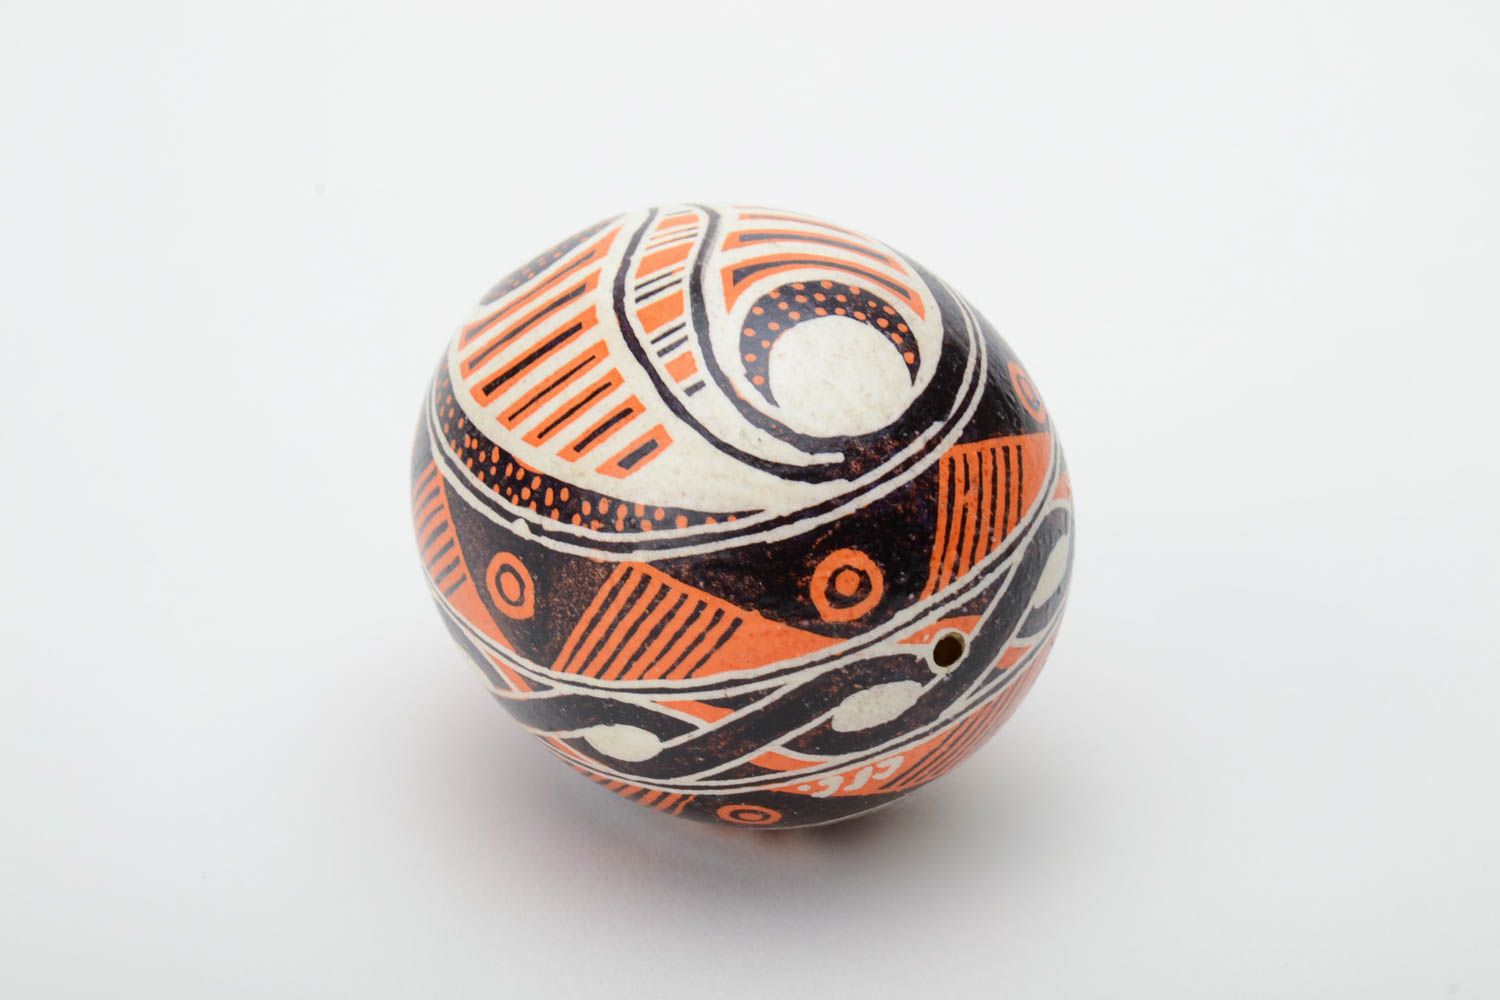 Handmade designer pysanka decorative Easter egg painted with wax and aniline dyes photo 4